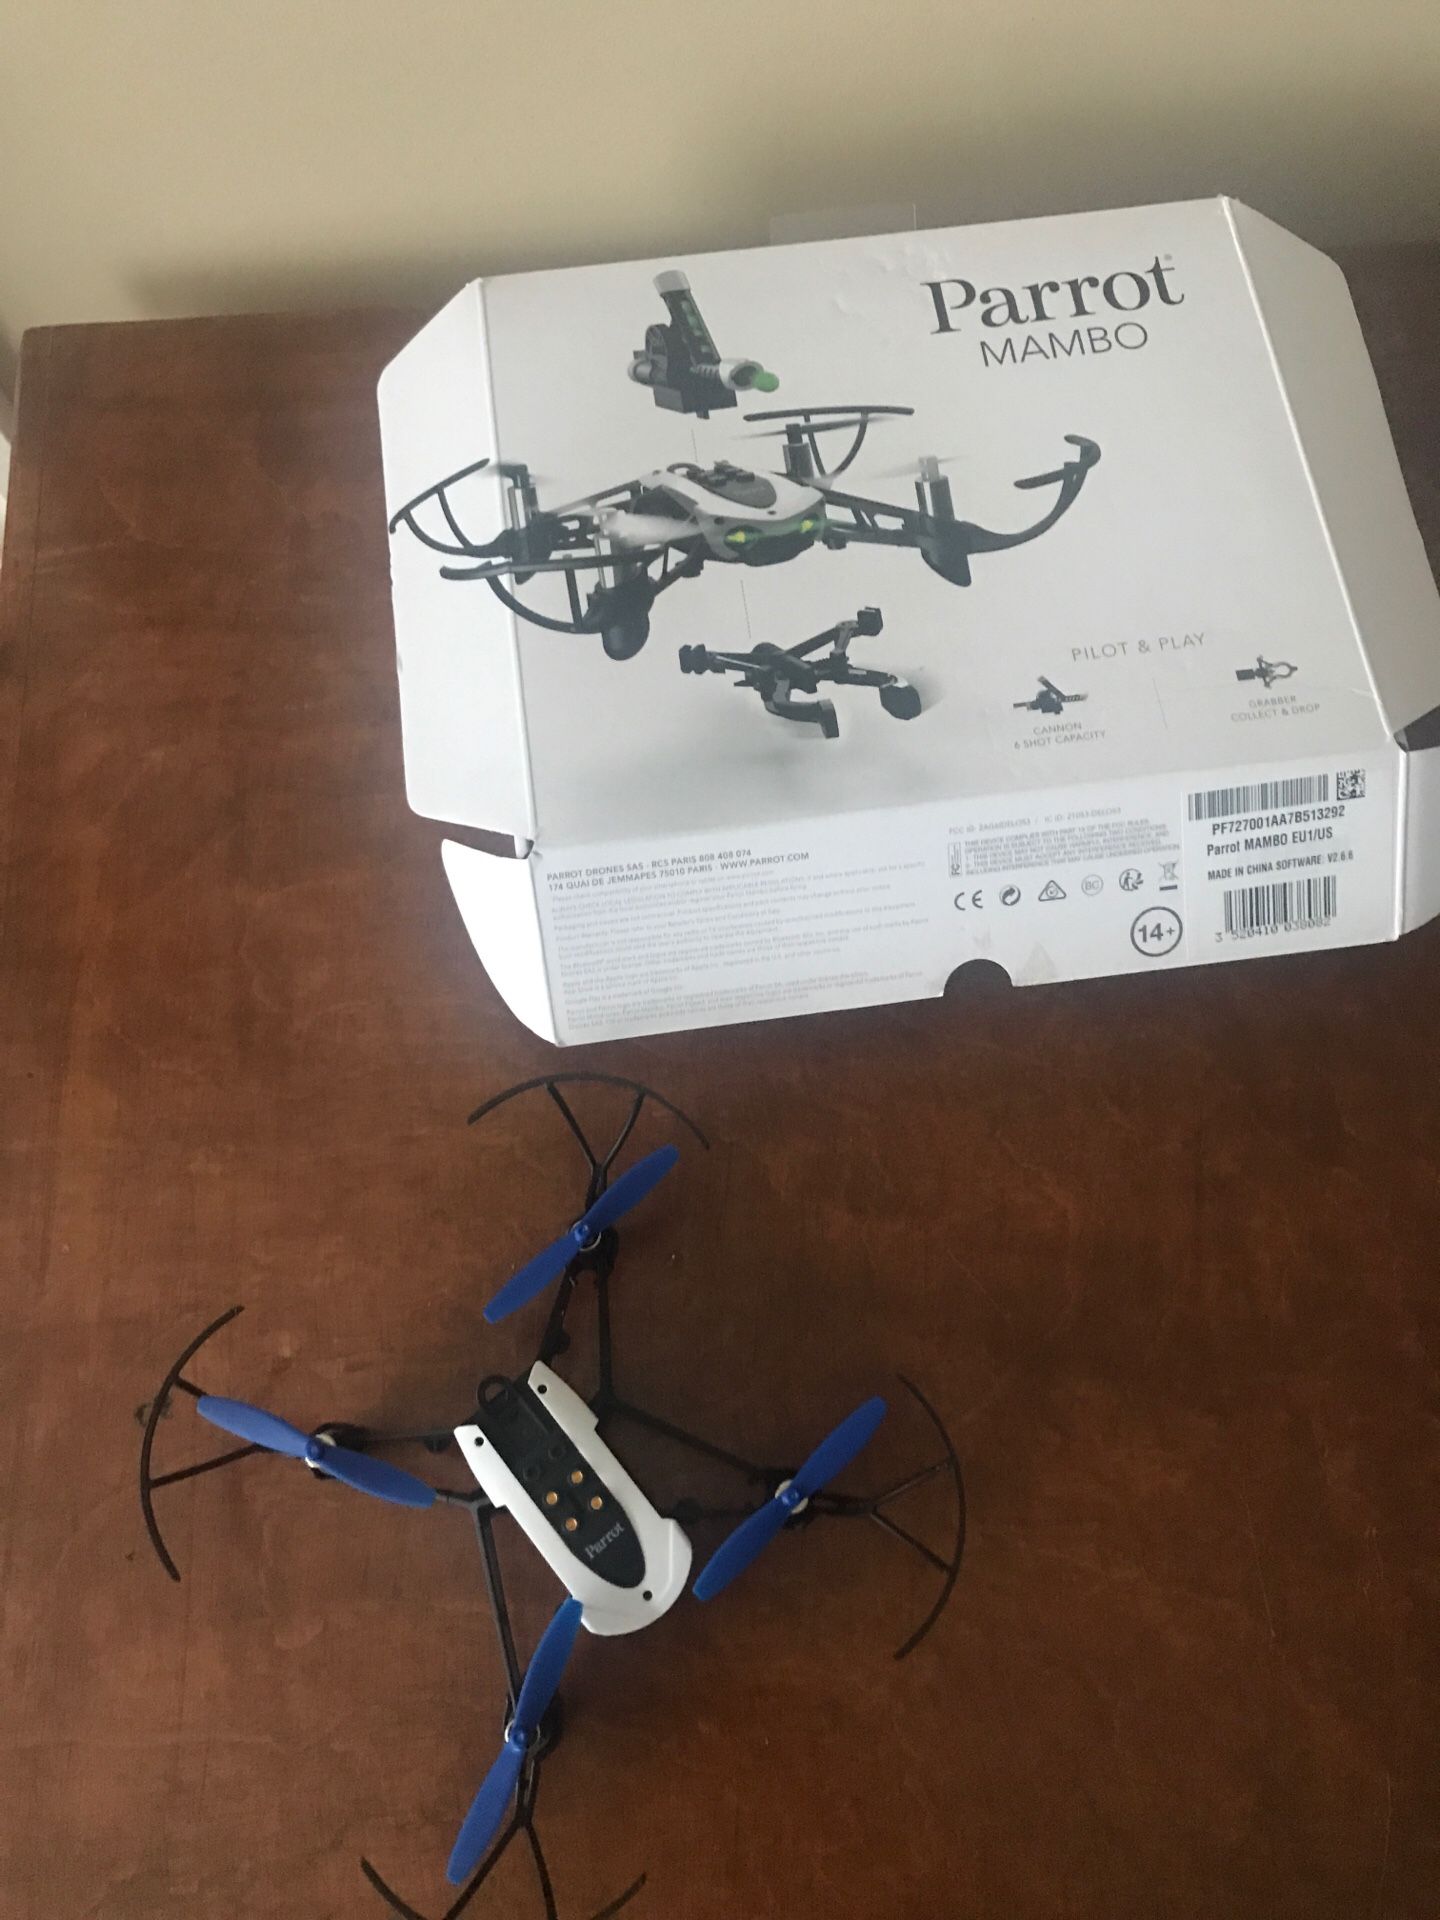 Parrot Mambo Drone Everything needed to fly